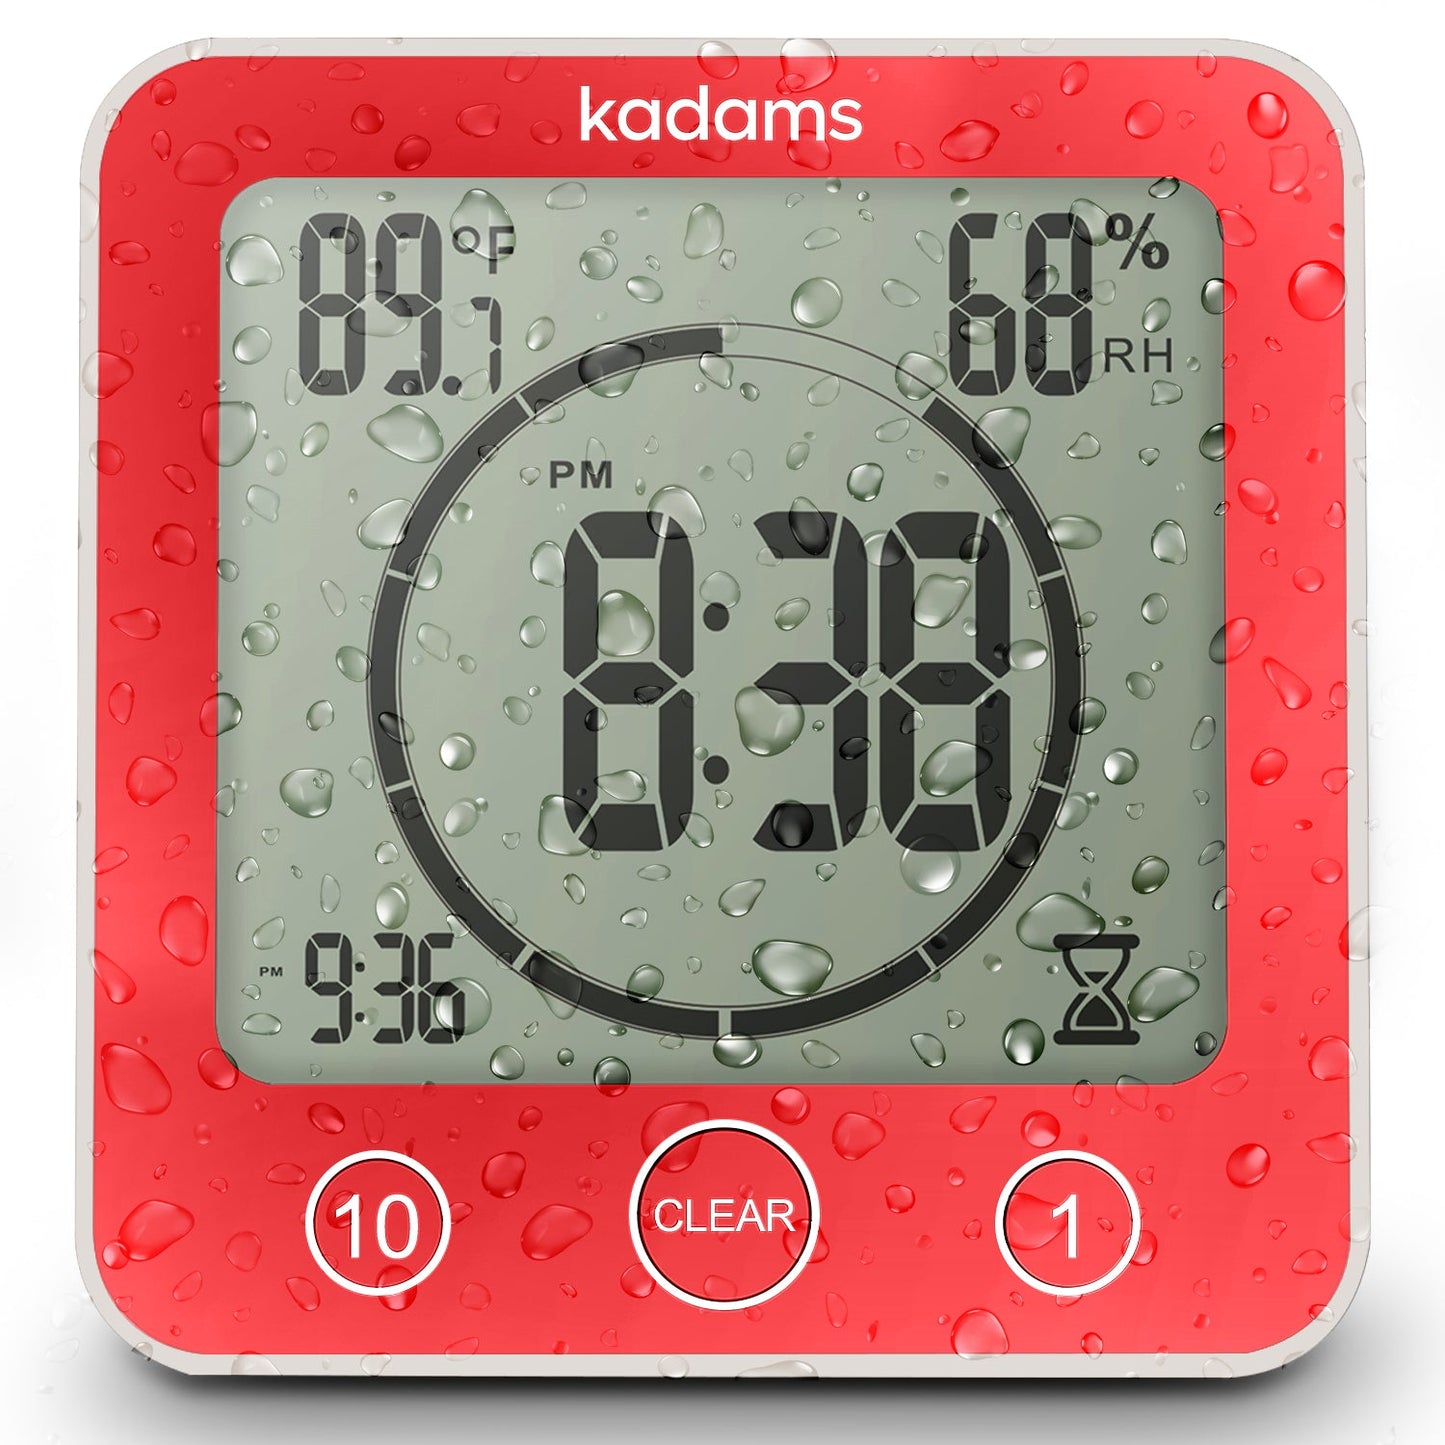 KADAMS Digital Bathroom Shower Kitchen Clock Timer with Alarm, Waterproof for Water Splashes, Visual Countdown Timer, Time Management Tool, Indoor Temperature Humidity, Suction Cup, Hole Stand - Red